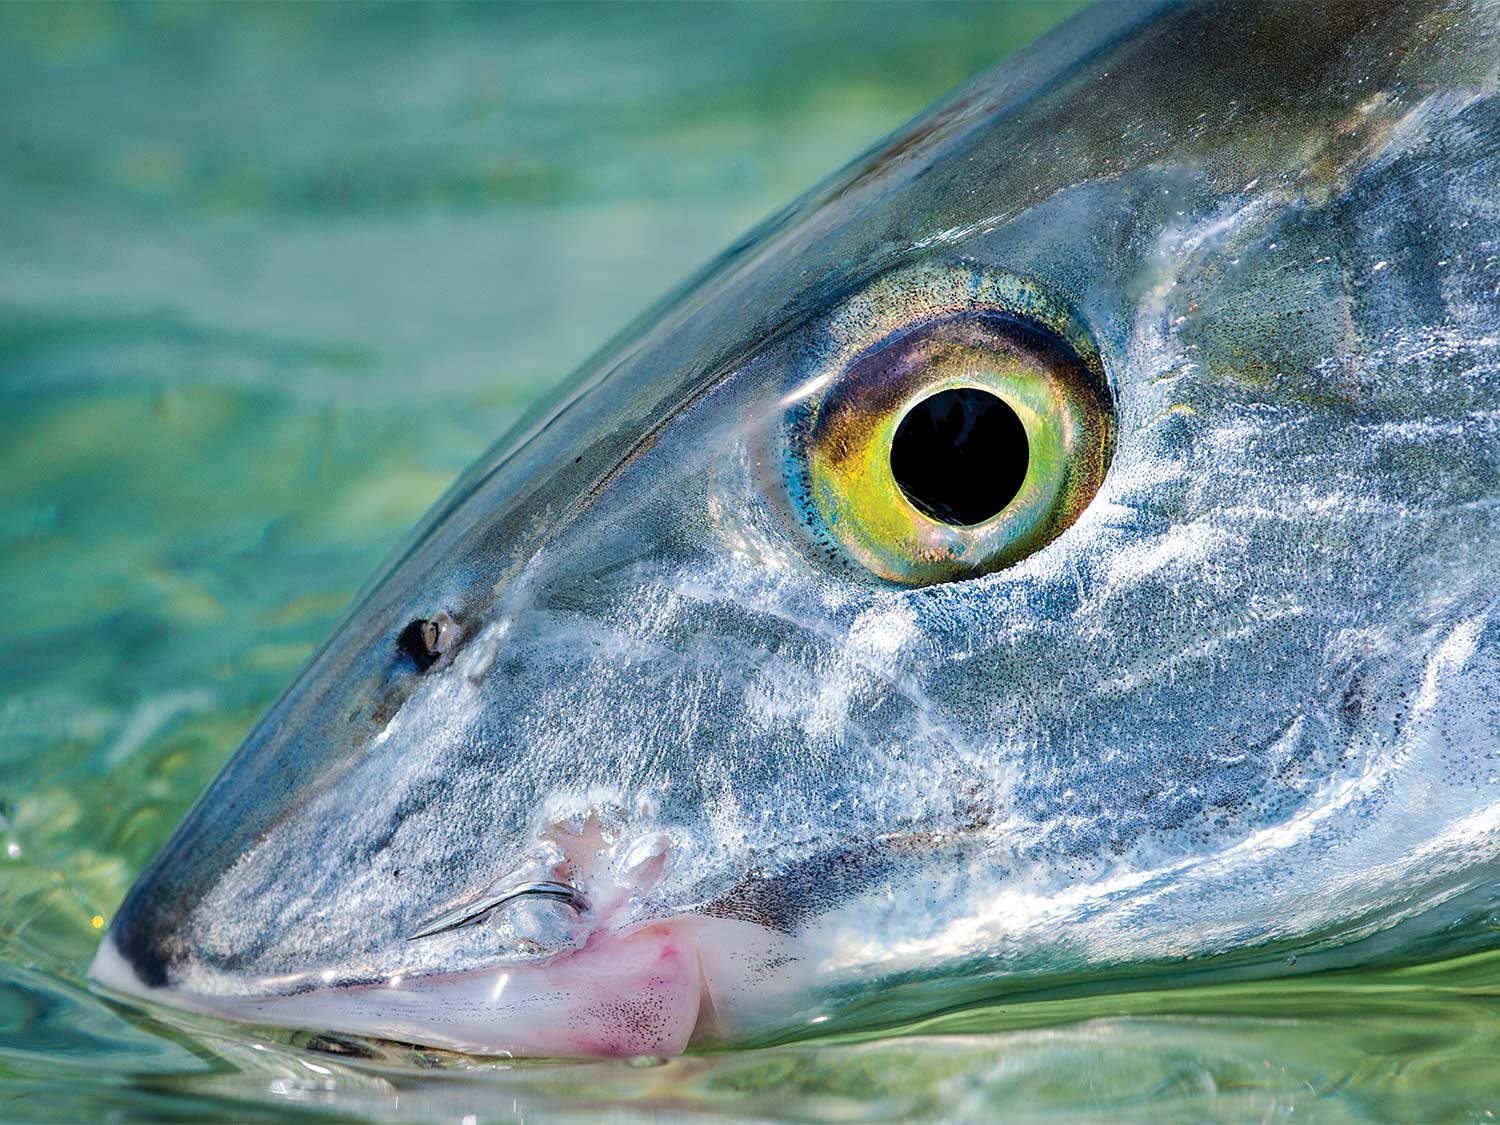 close up detail of a bonefish head and eye